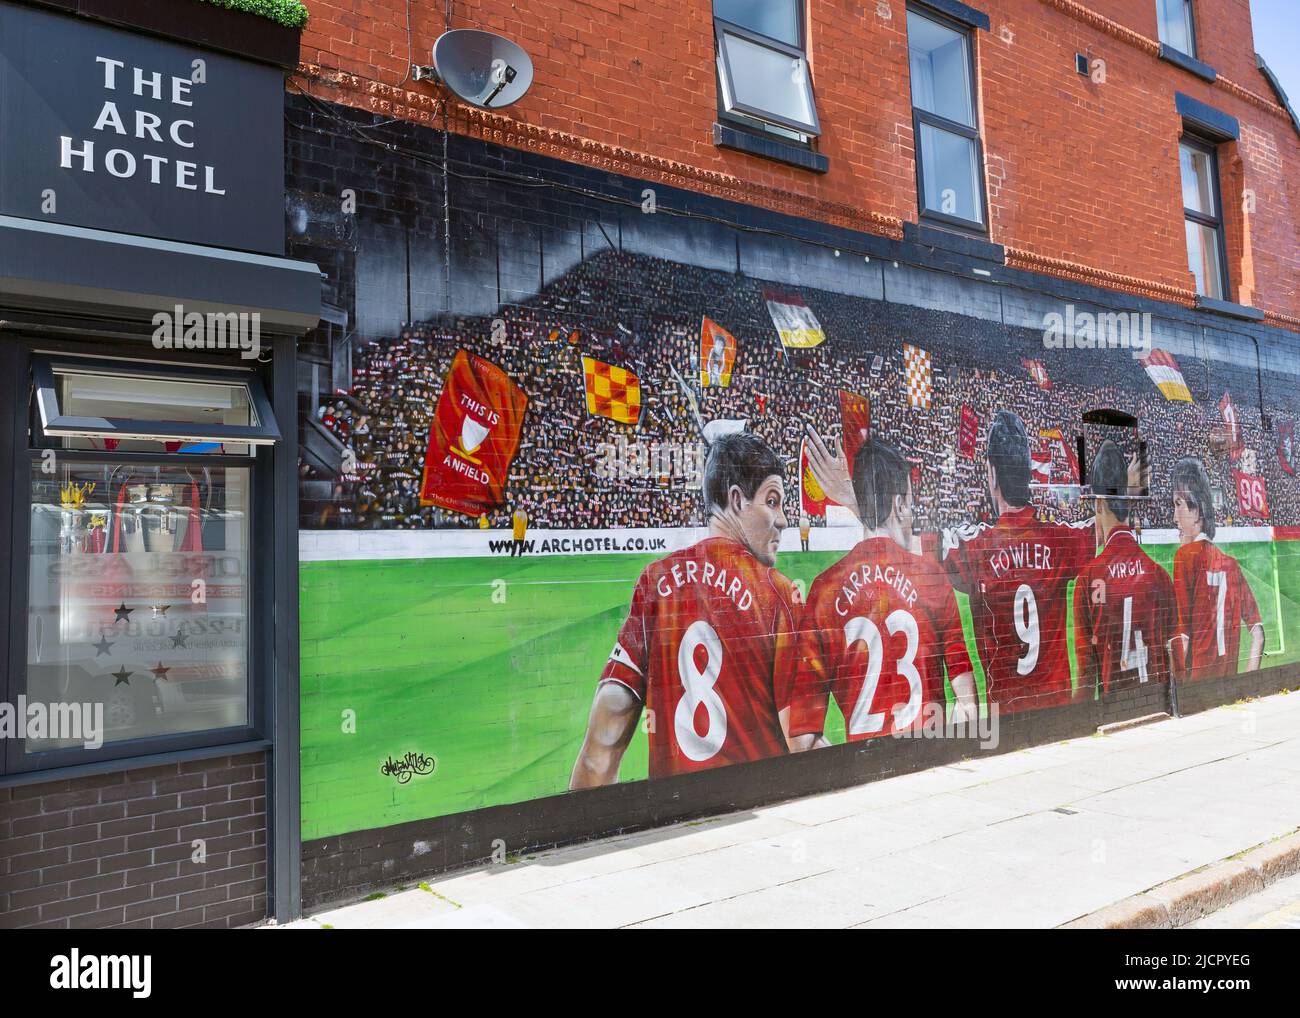 Mural of famous Liverpool FC players painted on building wall, Anfield, Liverpool, England, UK Stock Photo